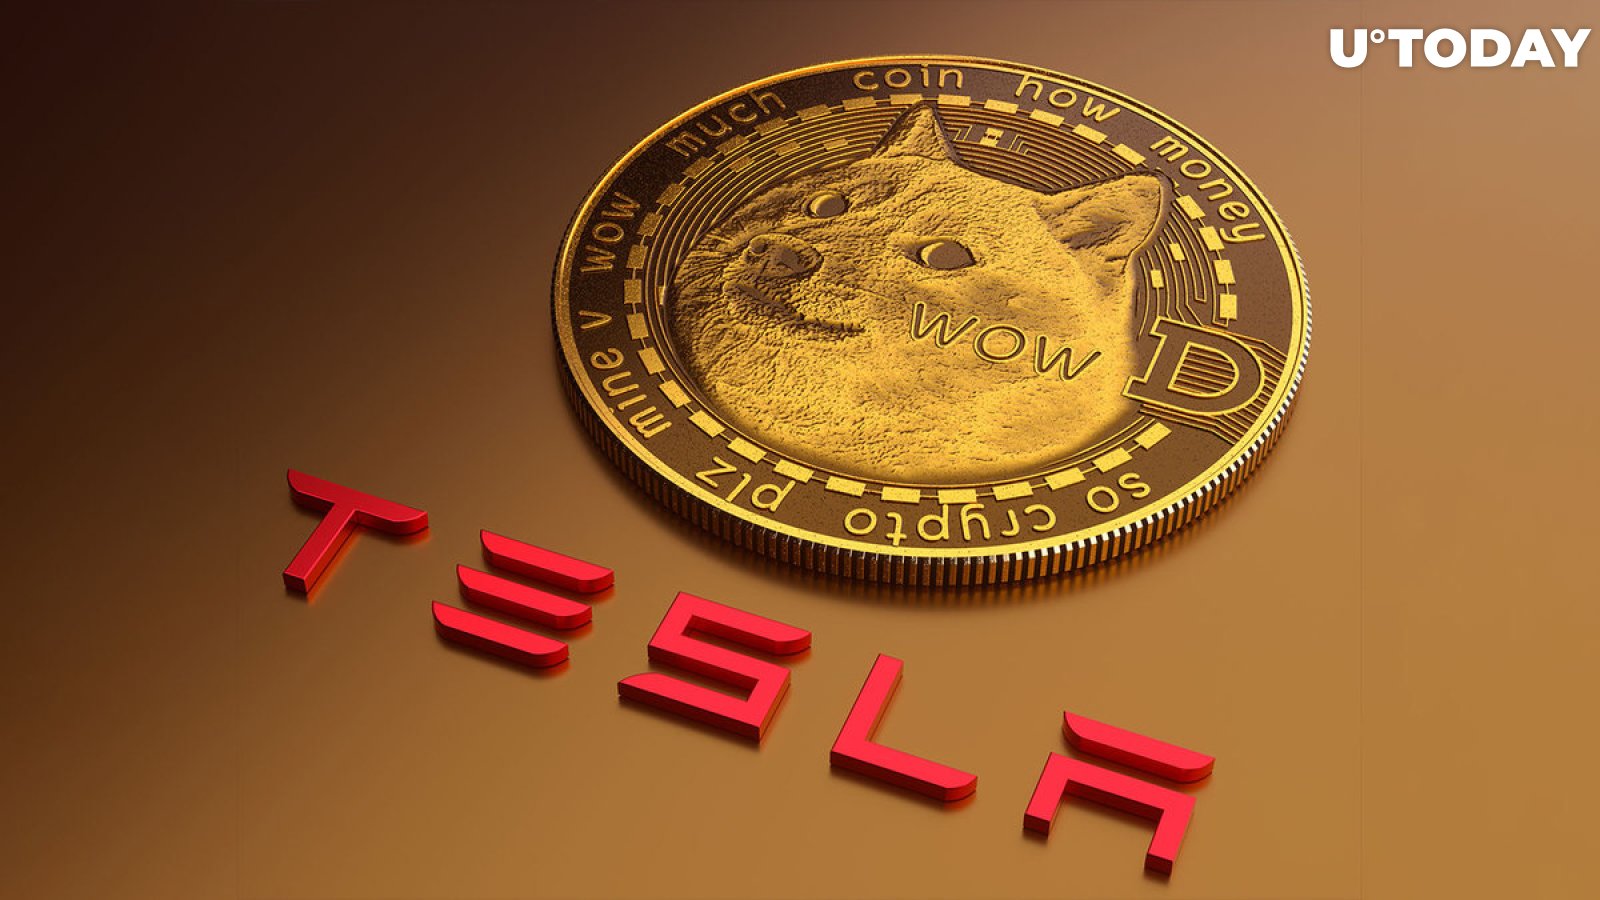 DOGE Creator Says He'd Spend $100,000 on Tesla Stock, Why Not Crypto?